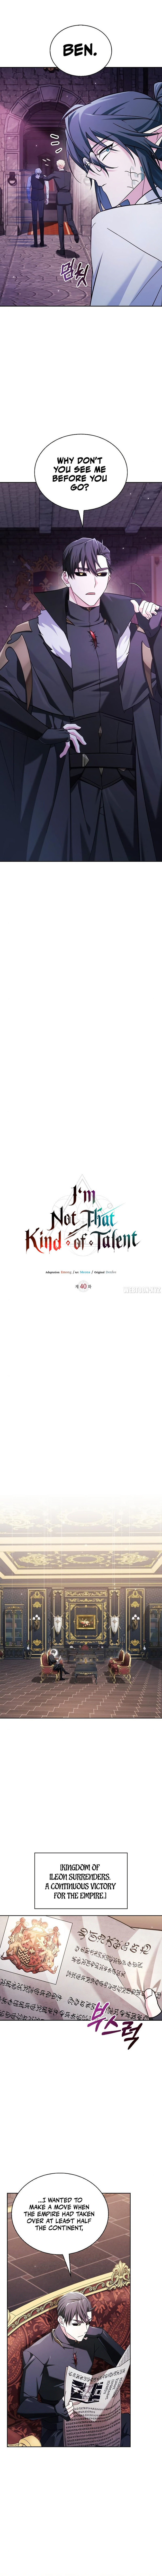 im-not-that-kind-of-talent-chap-40-11